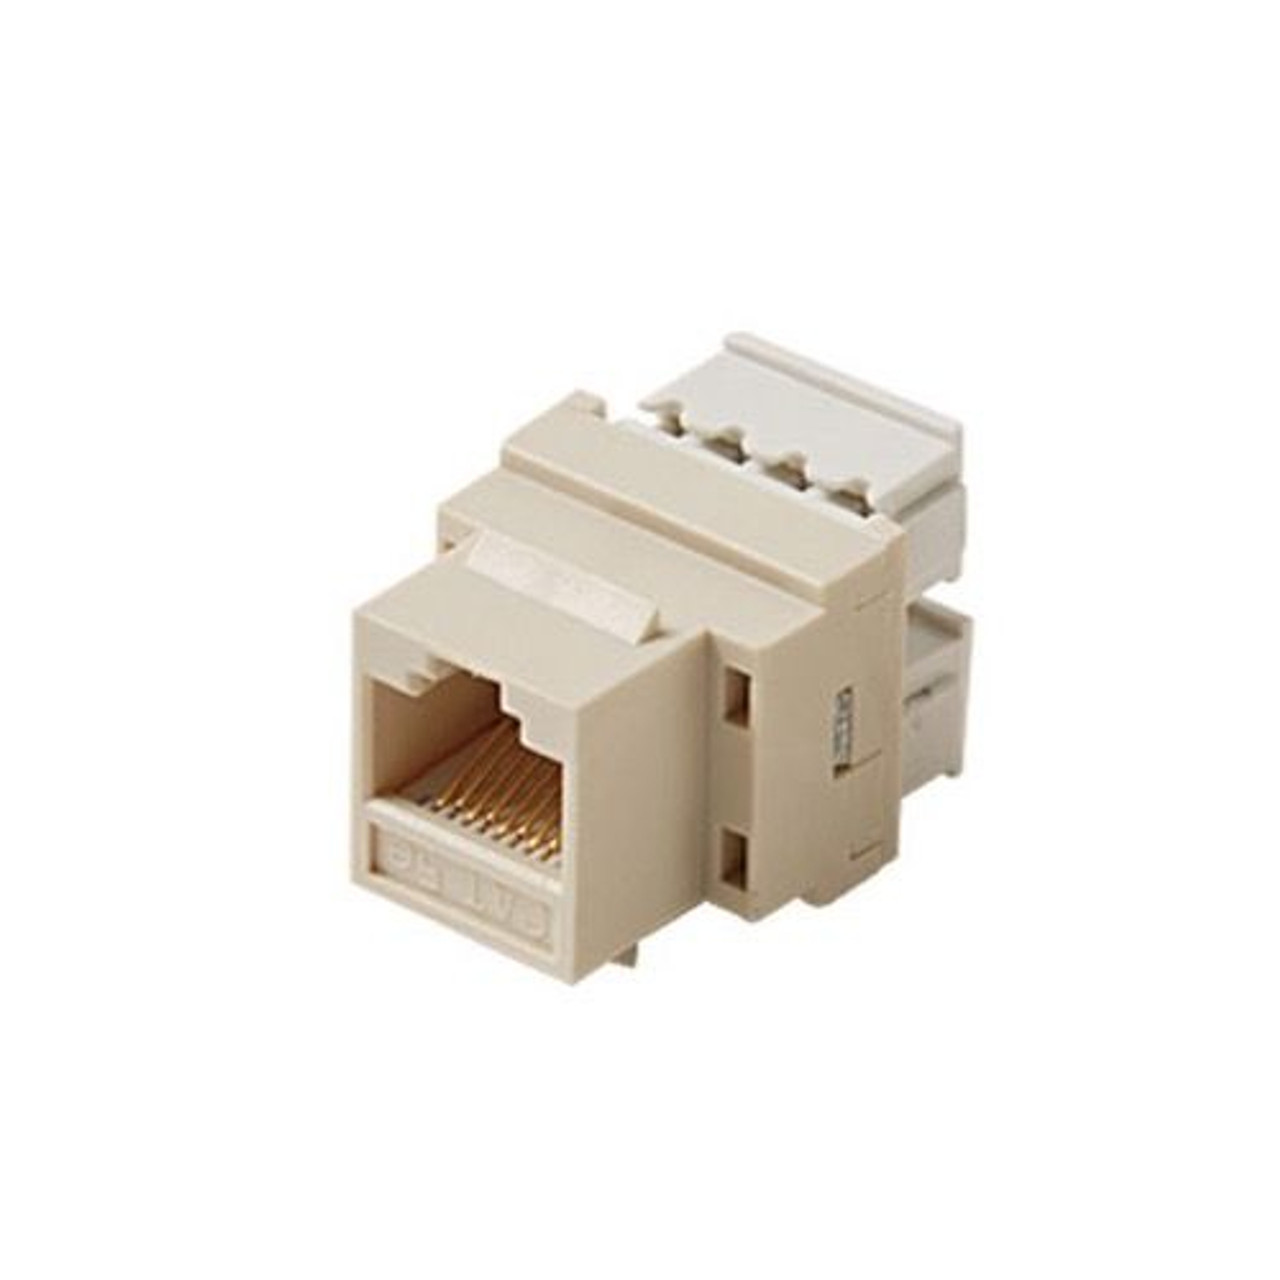 Eagle CAT5E Keystone Jack Ivory Insert RJ45 Punch Down Gold 8P8C Network Cat5e Connector Cat-5e RJ-45 QuickPort 8 Wire Twisted Pair Modular Telephone Wall Plate Snap-In Insert Computer Data Network Telecom